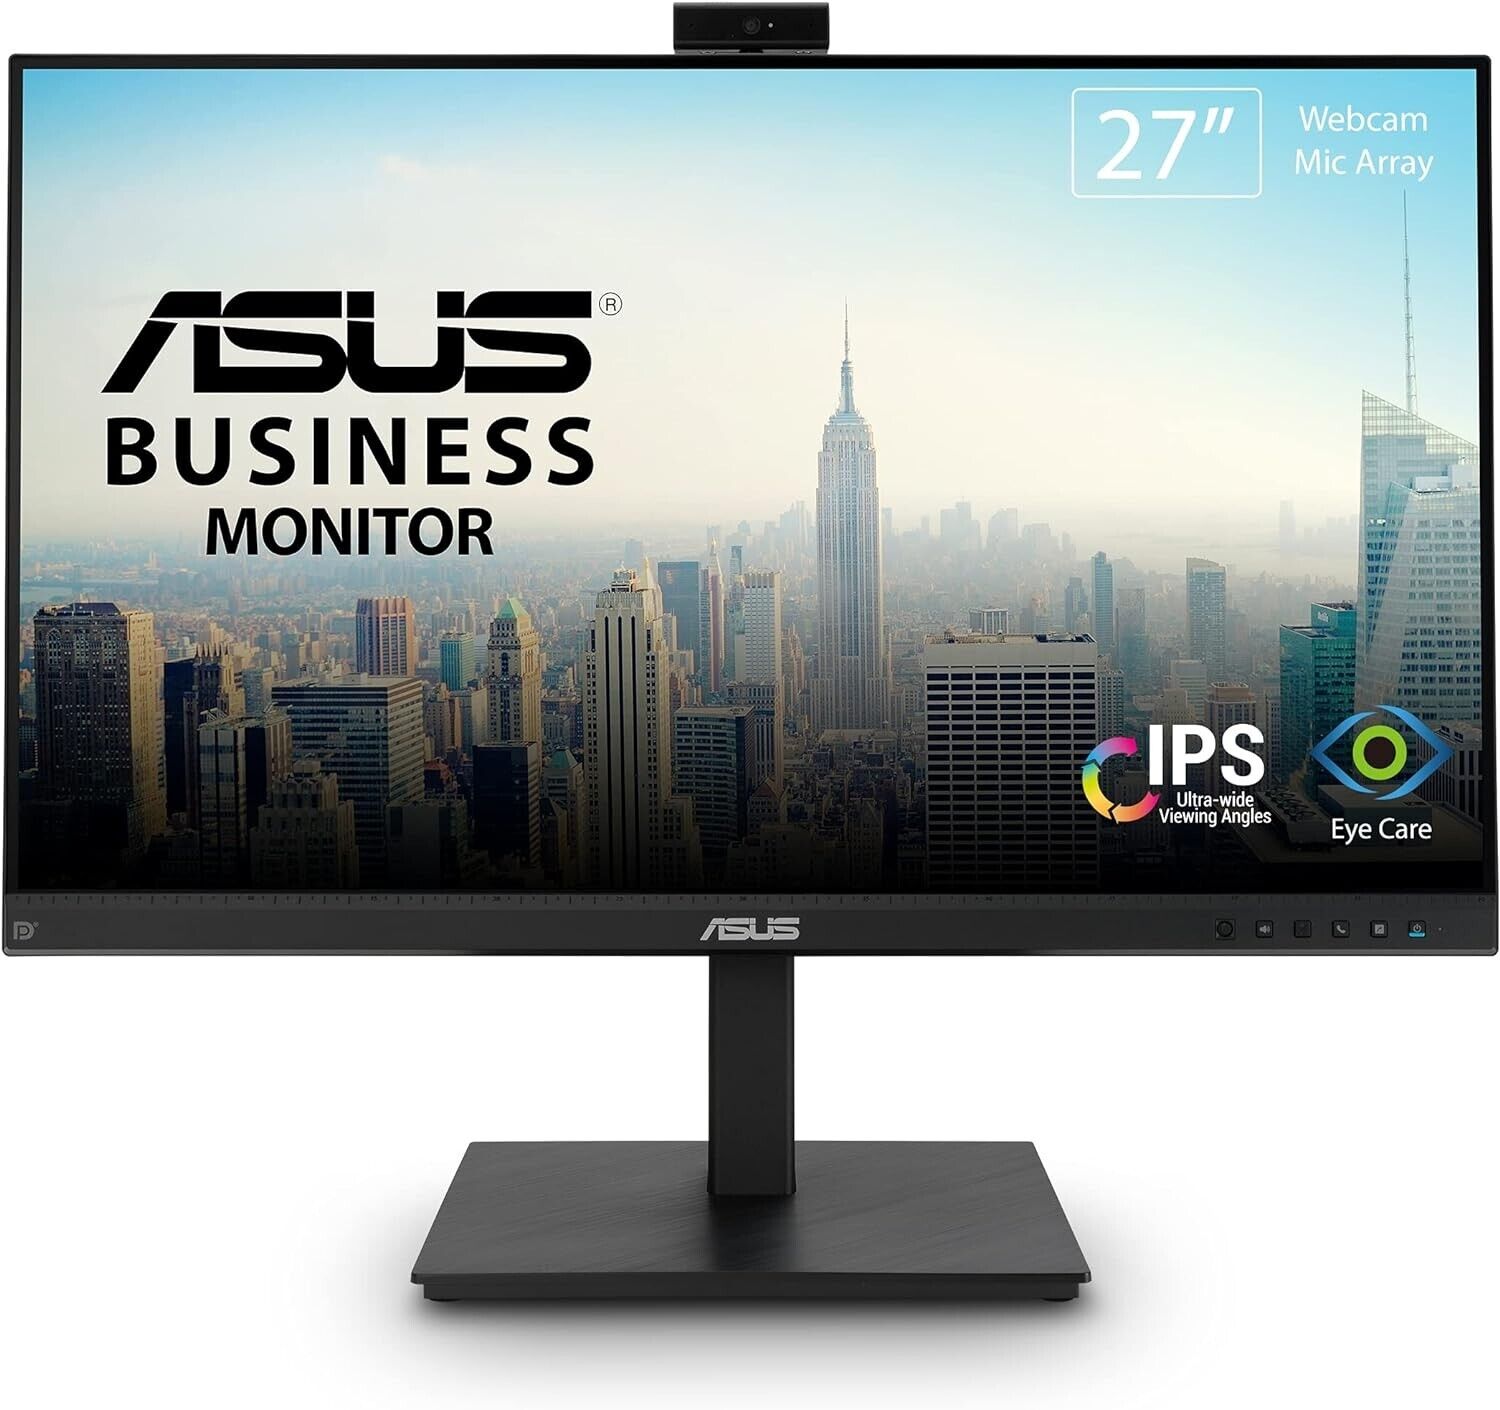 ASUS 27” 1080P Video Conference Monitor (BE279QSK) - Full HD